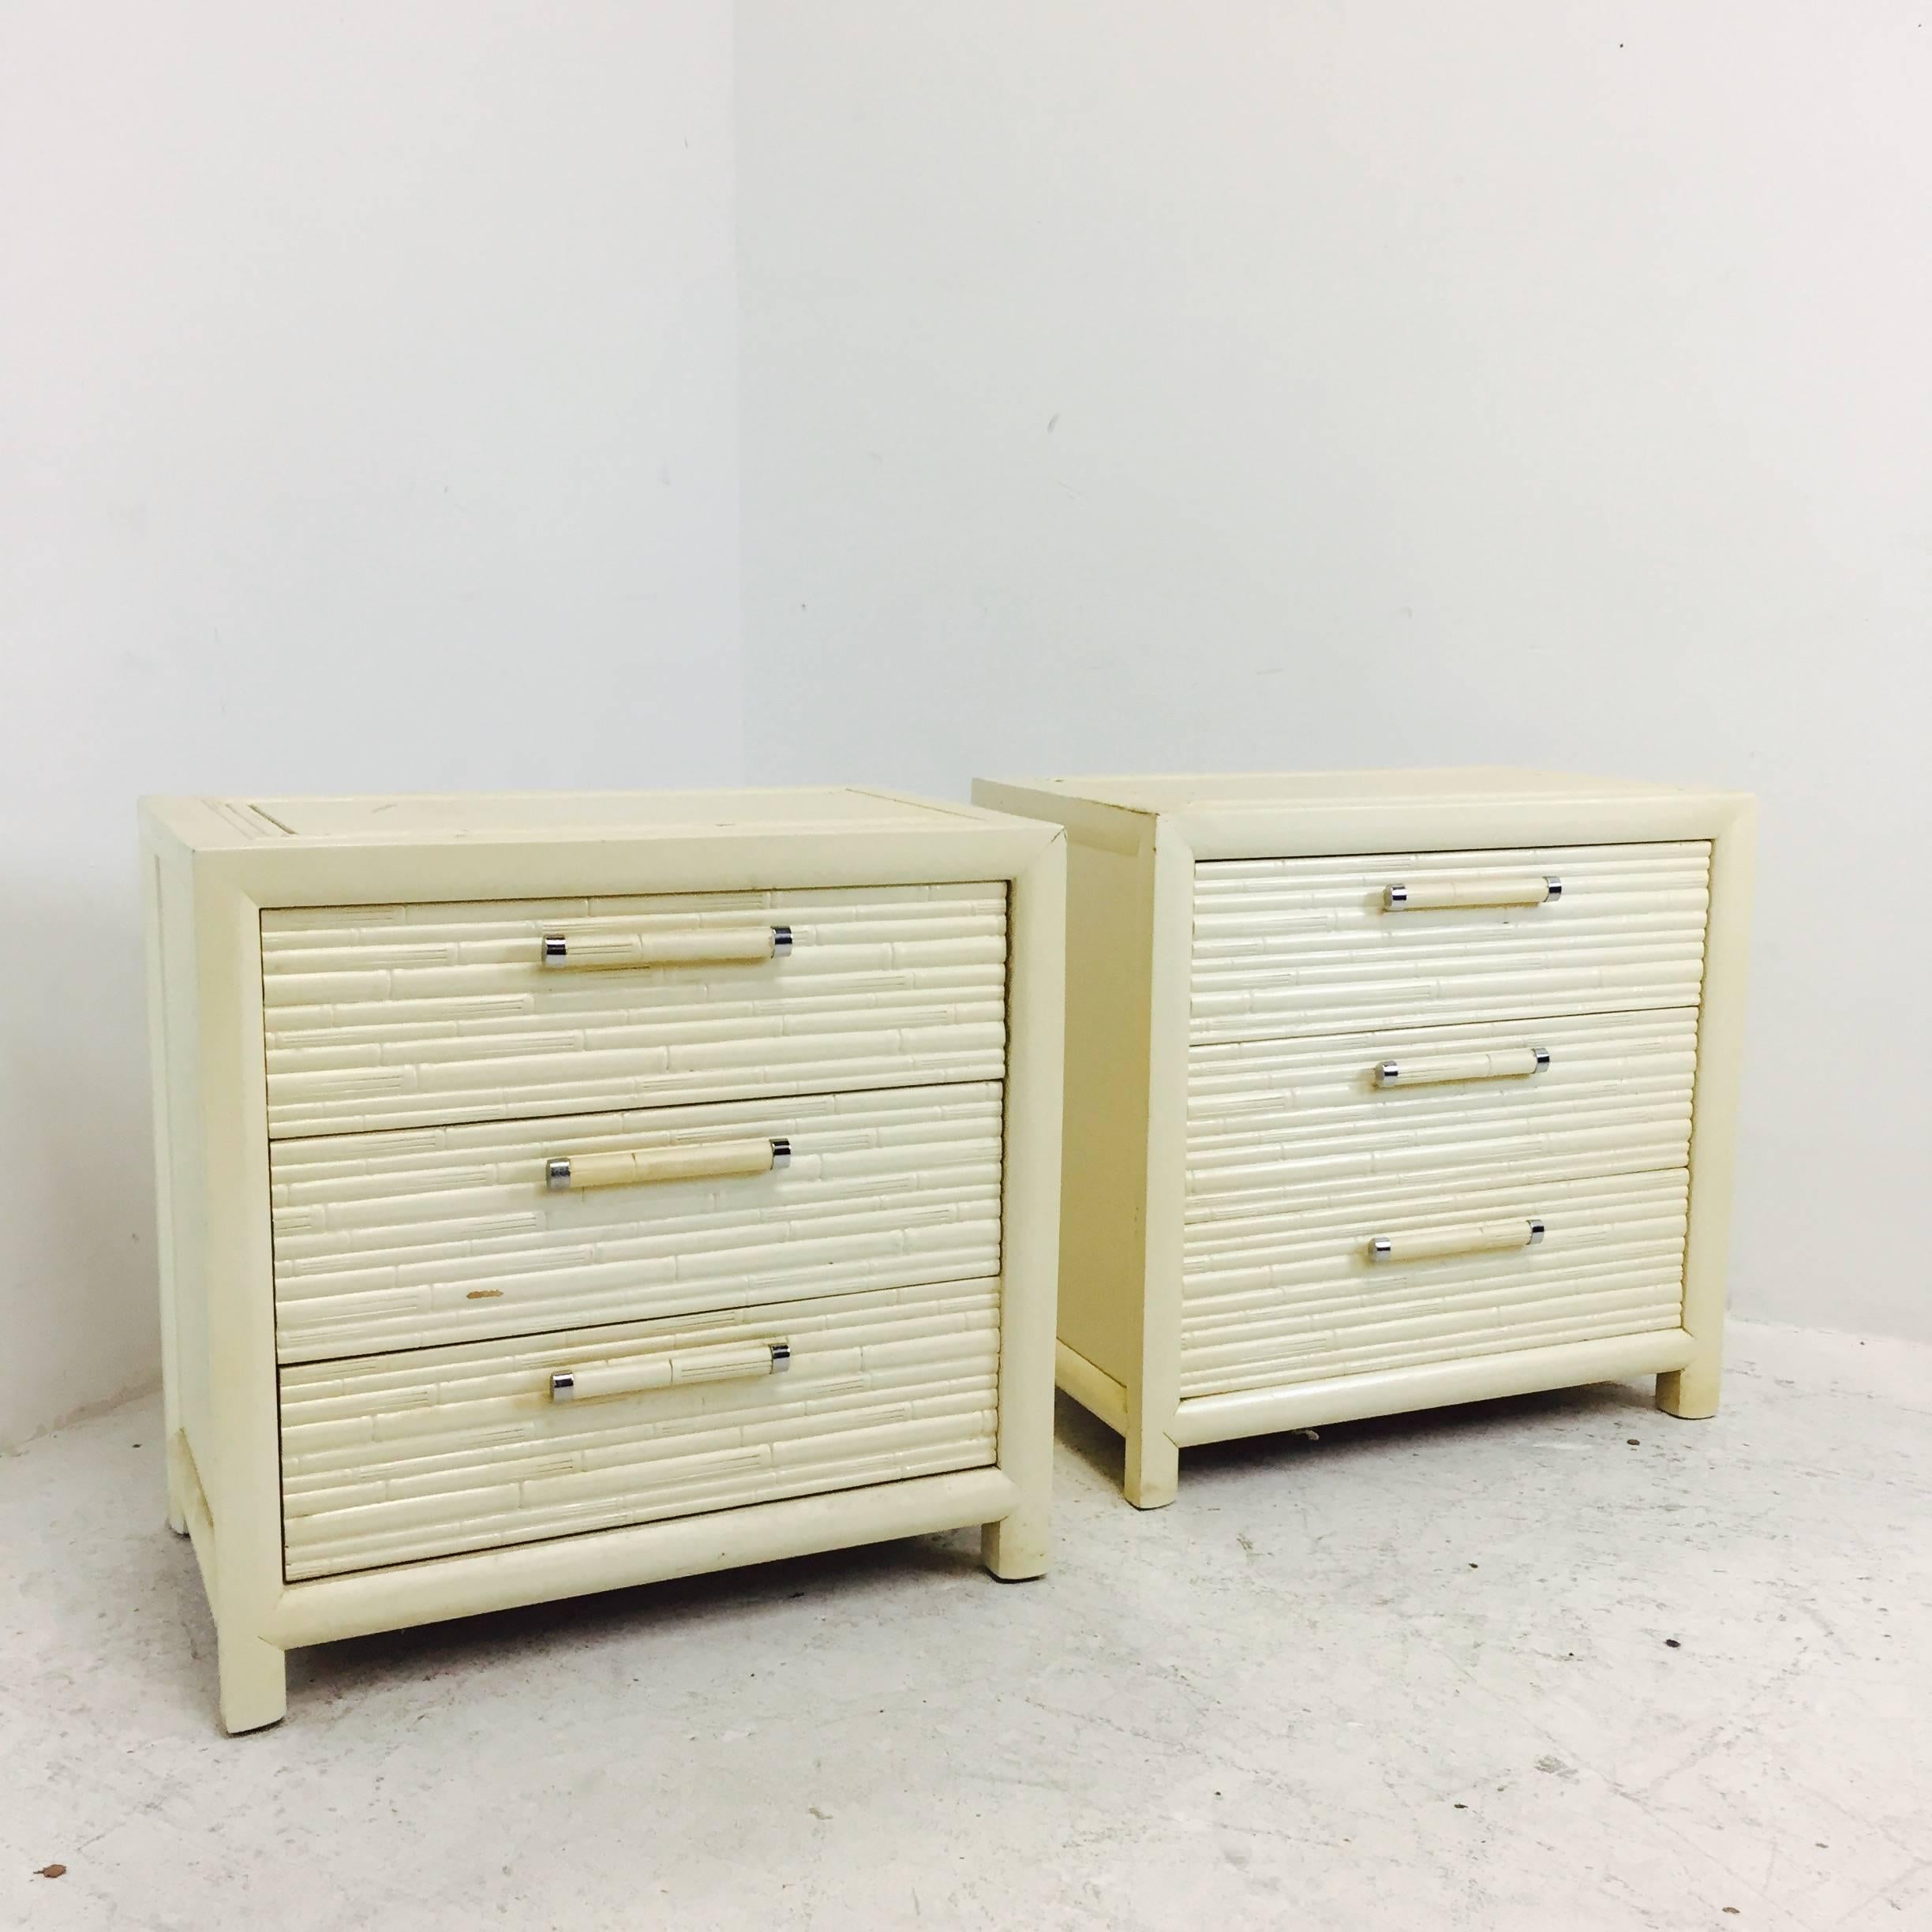 Pair of faux bamboo nightstands by Century. There is visible wear on the nightstands. New lacquer is all these guys need to be updated, circa 1960s.

dimensions: 26